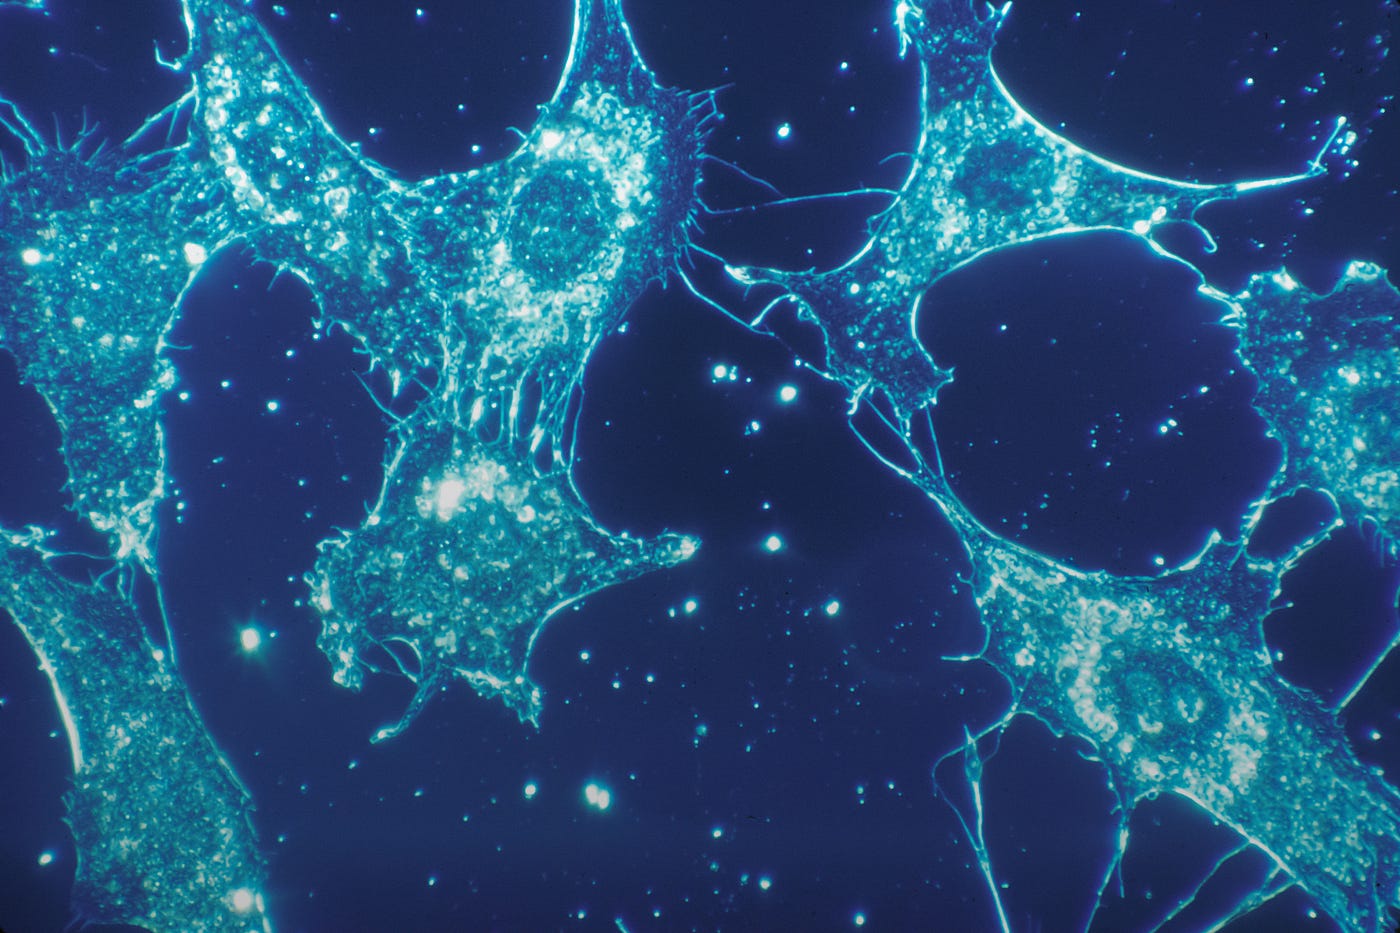 Micrograph of several elongated bluish body cells, set against a dark blue background.